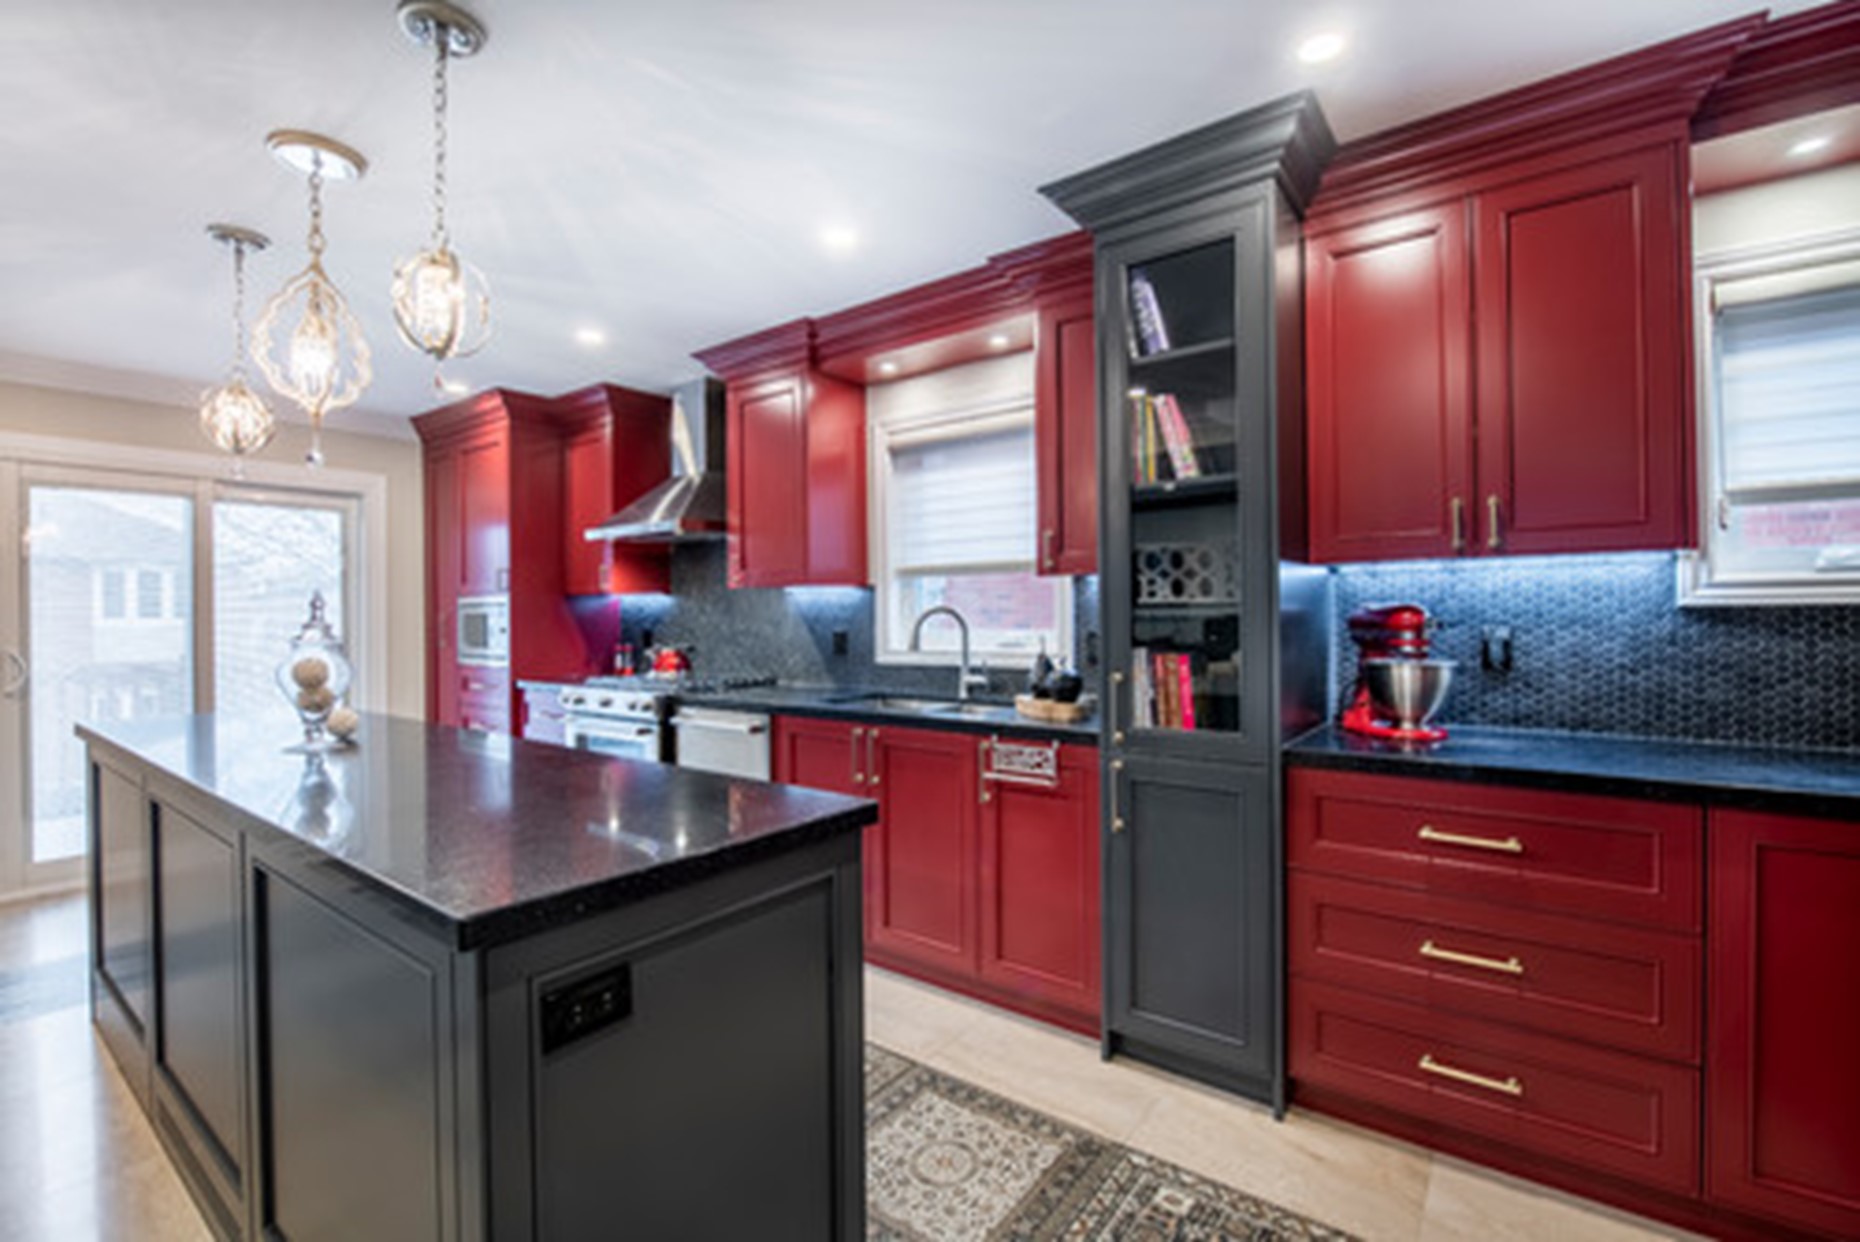 Accessories to Complement Your Cherry Cabinets